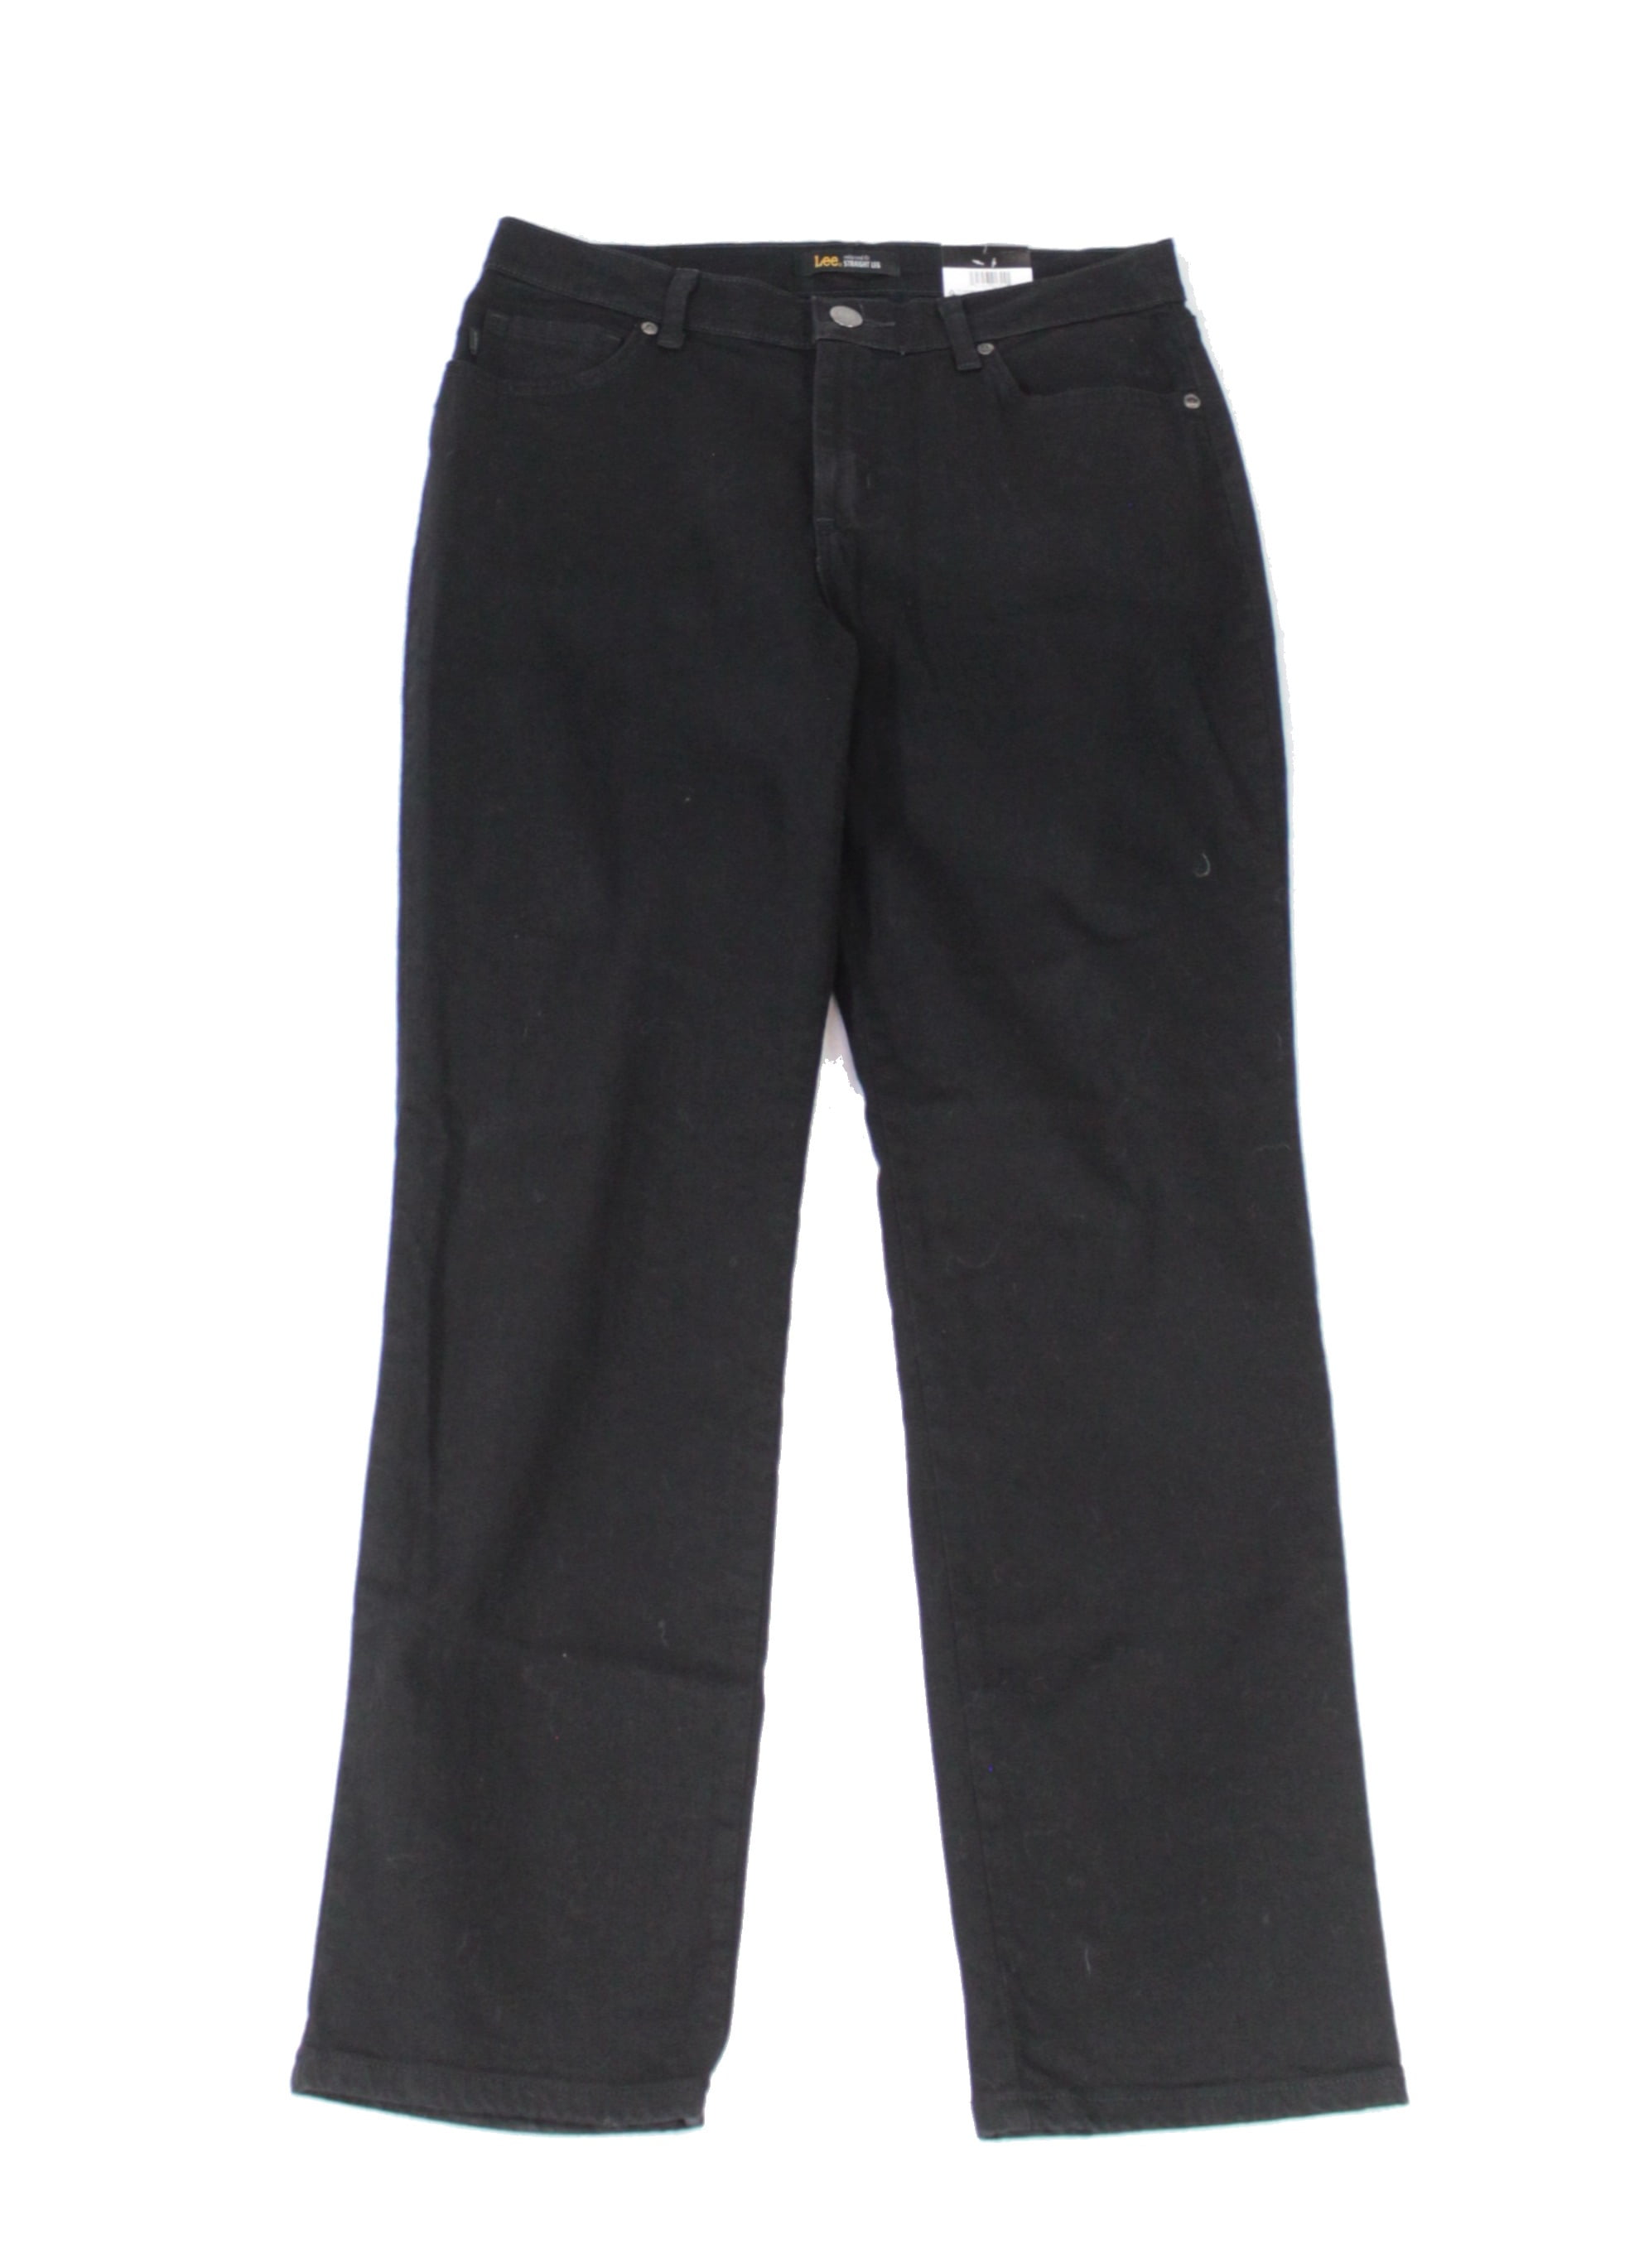 Women's Jeans Petite Relaxed Fit Straight Stretch 8P - Walmart.com